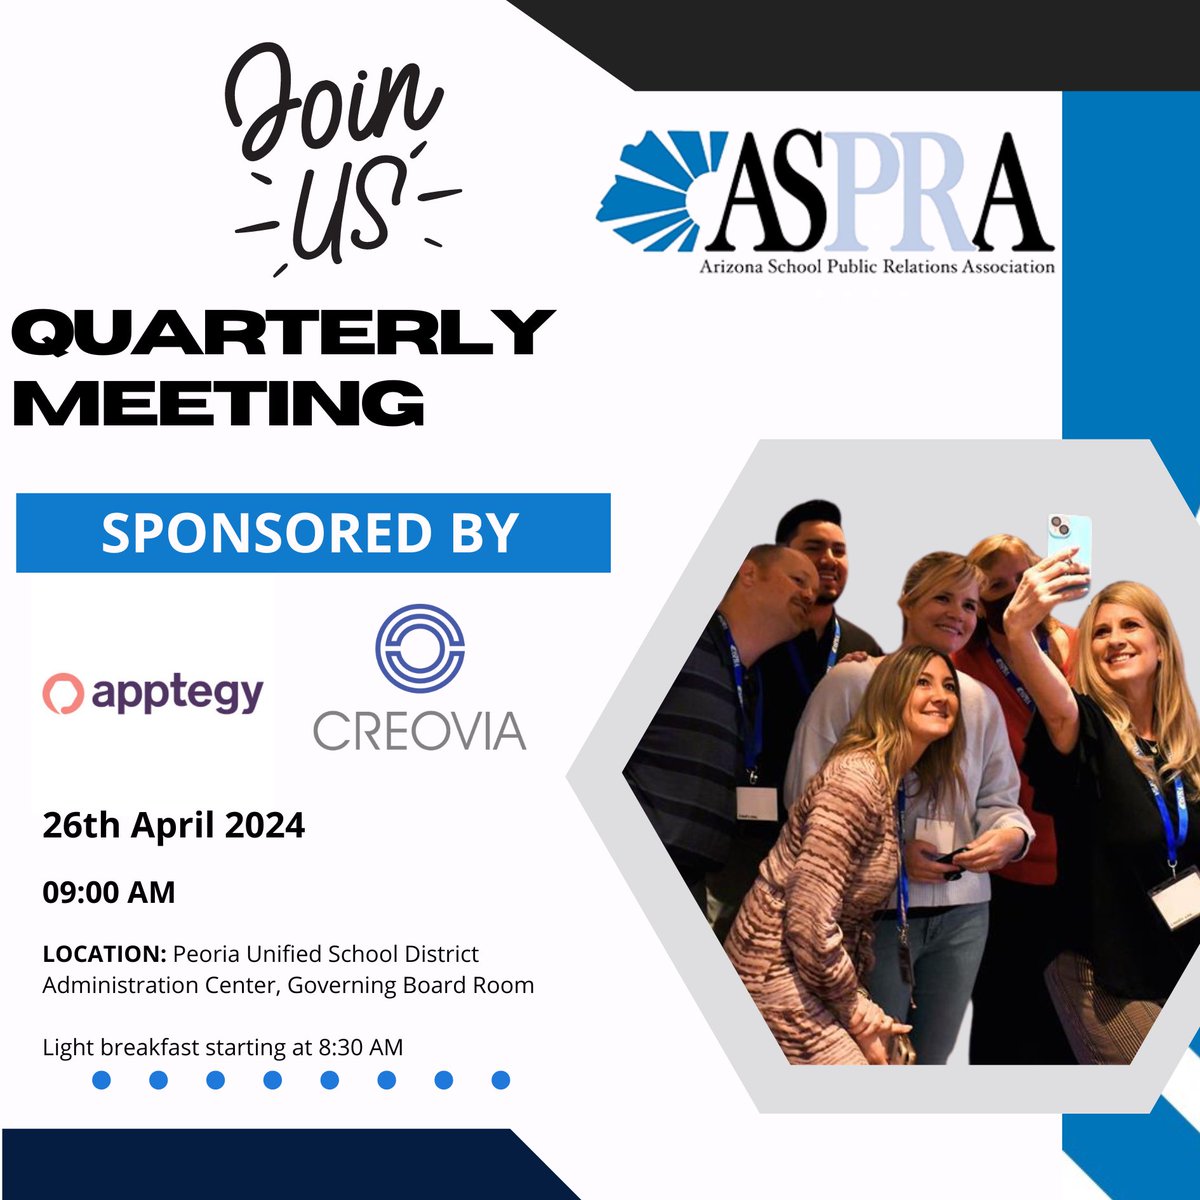 We are TWO days away from our next #quarterlymeeting! Meet us Friday, April 26 at the Peoria Unified School district office at 9 AM. We can’t wait to connect with you again. Special thank you to our sponsors @Apptegy & #Creovia 🥳🤩